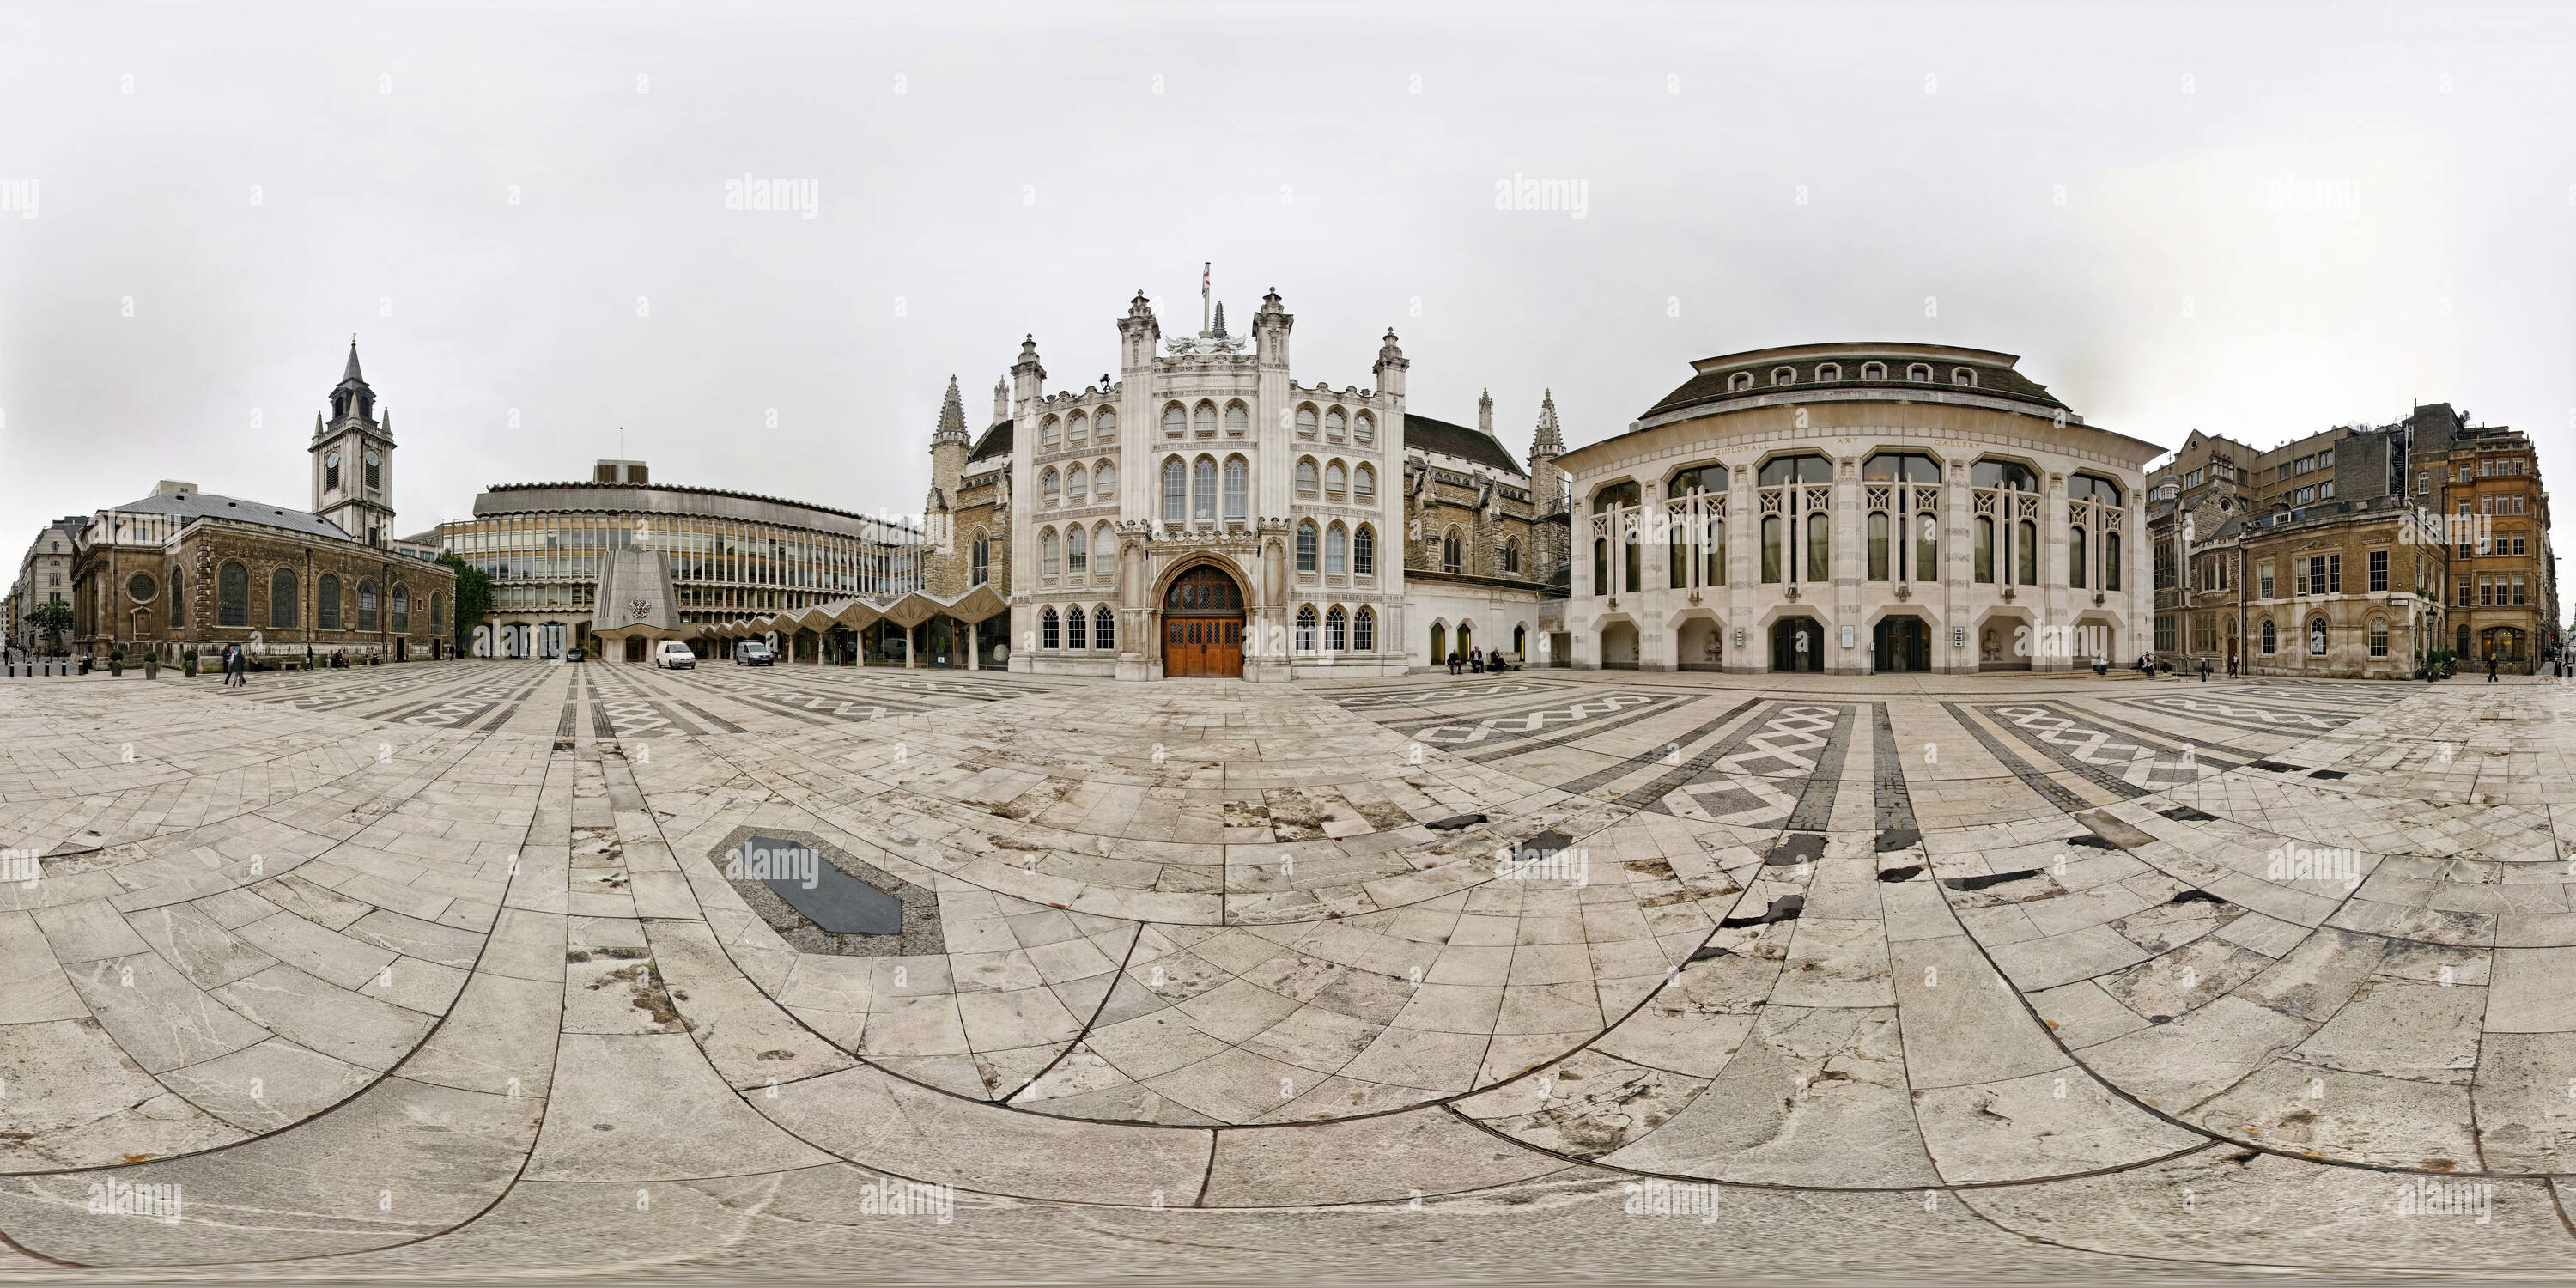 360 degree panoramic view of Guildhall, City of London